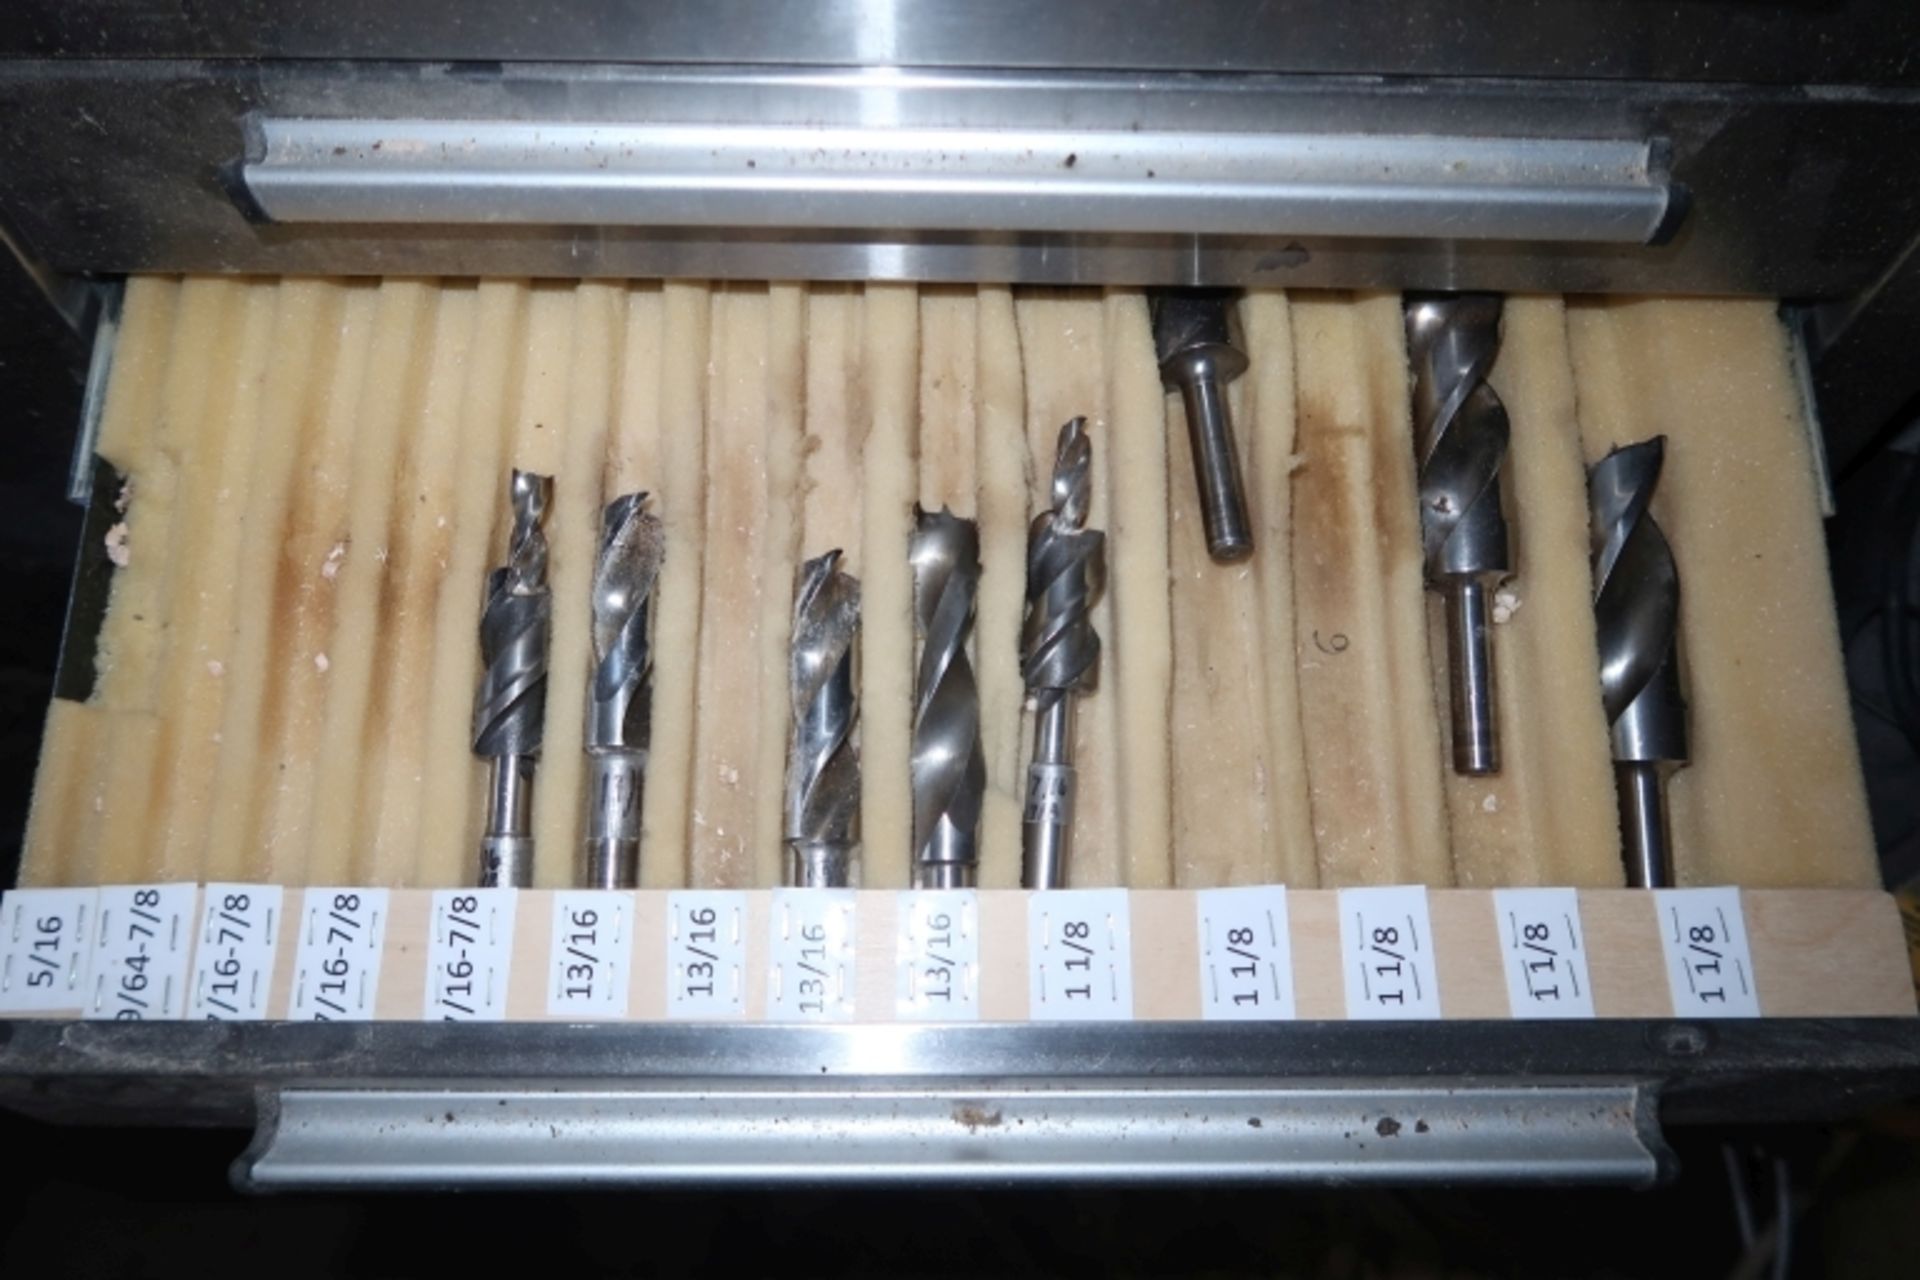 DRILL AND BORING BITS AND ACCESSORIES FOR DOUCET SICOTTE BORING MACHINE WITH TOOL CHEST - Image 5 of 9